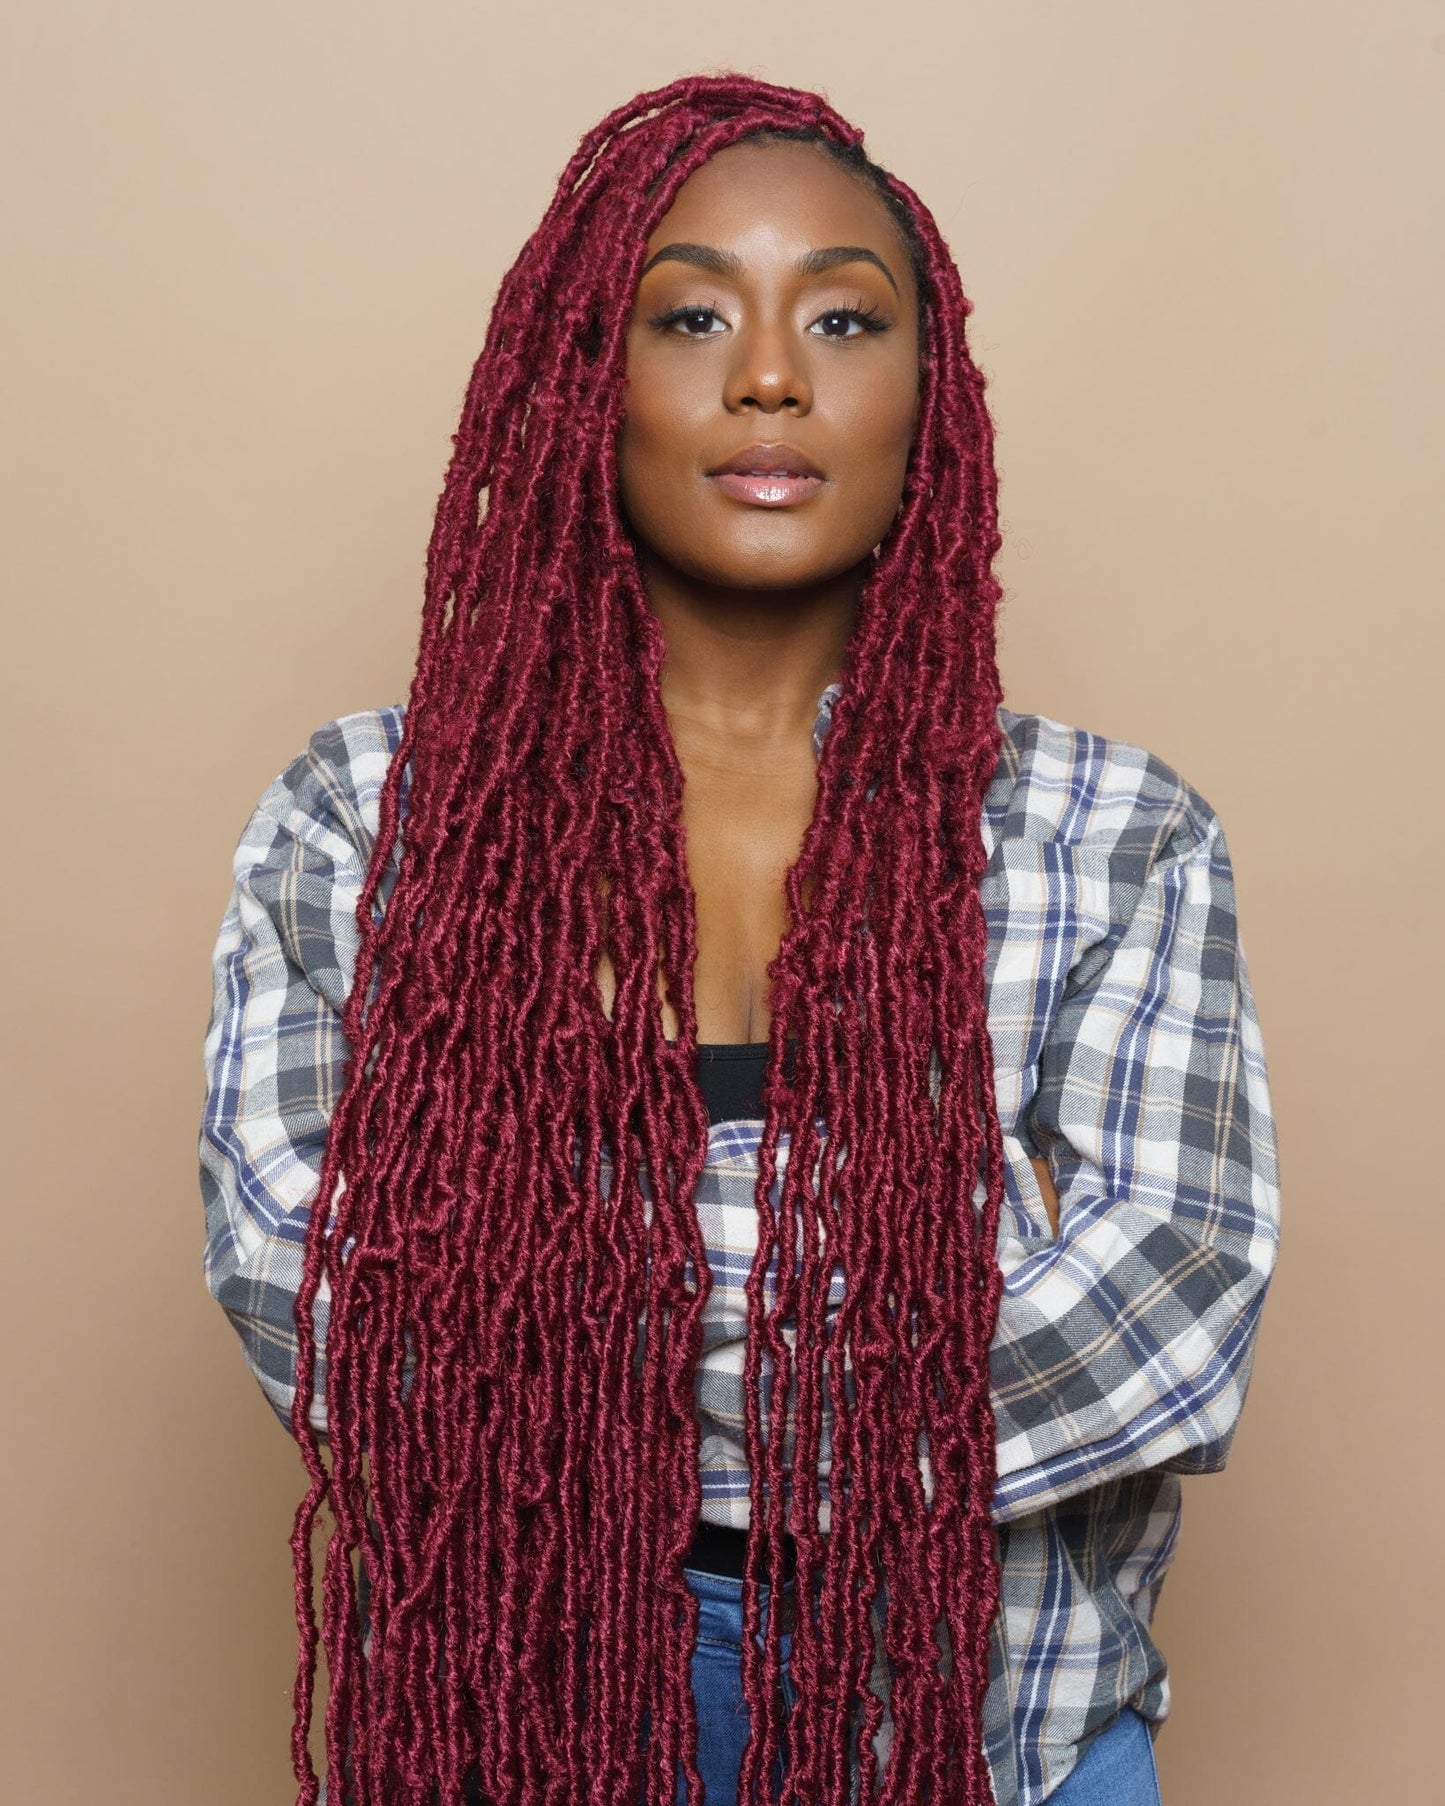 A black woman with long, dark red locs stands with her arms folded, looking at the camera. She wears a plaid shirt and jeans.